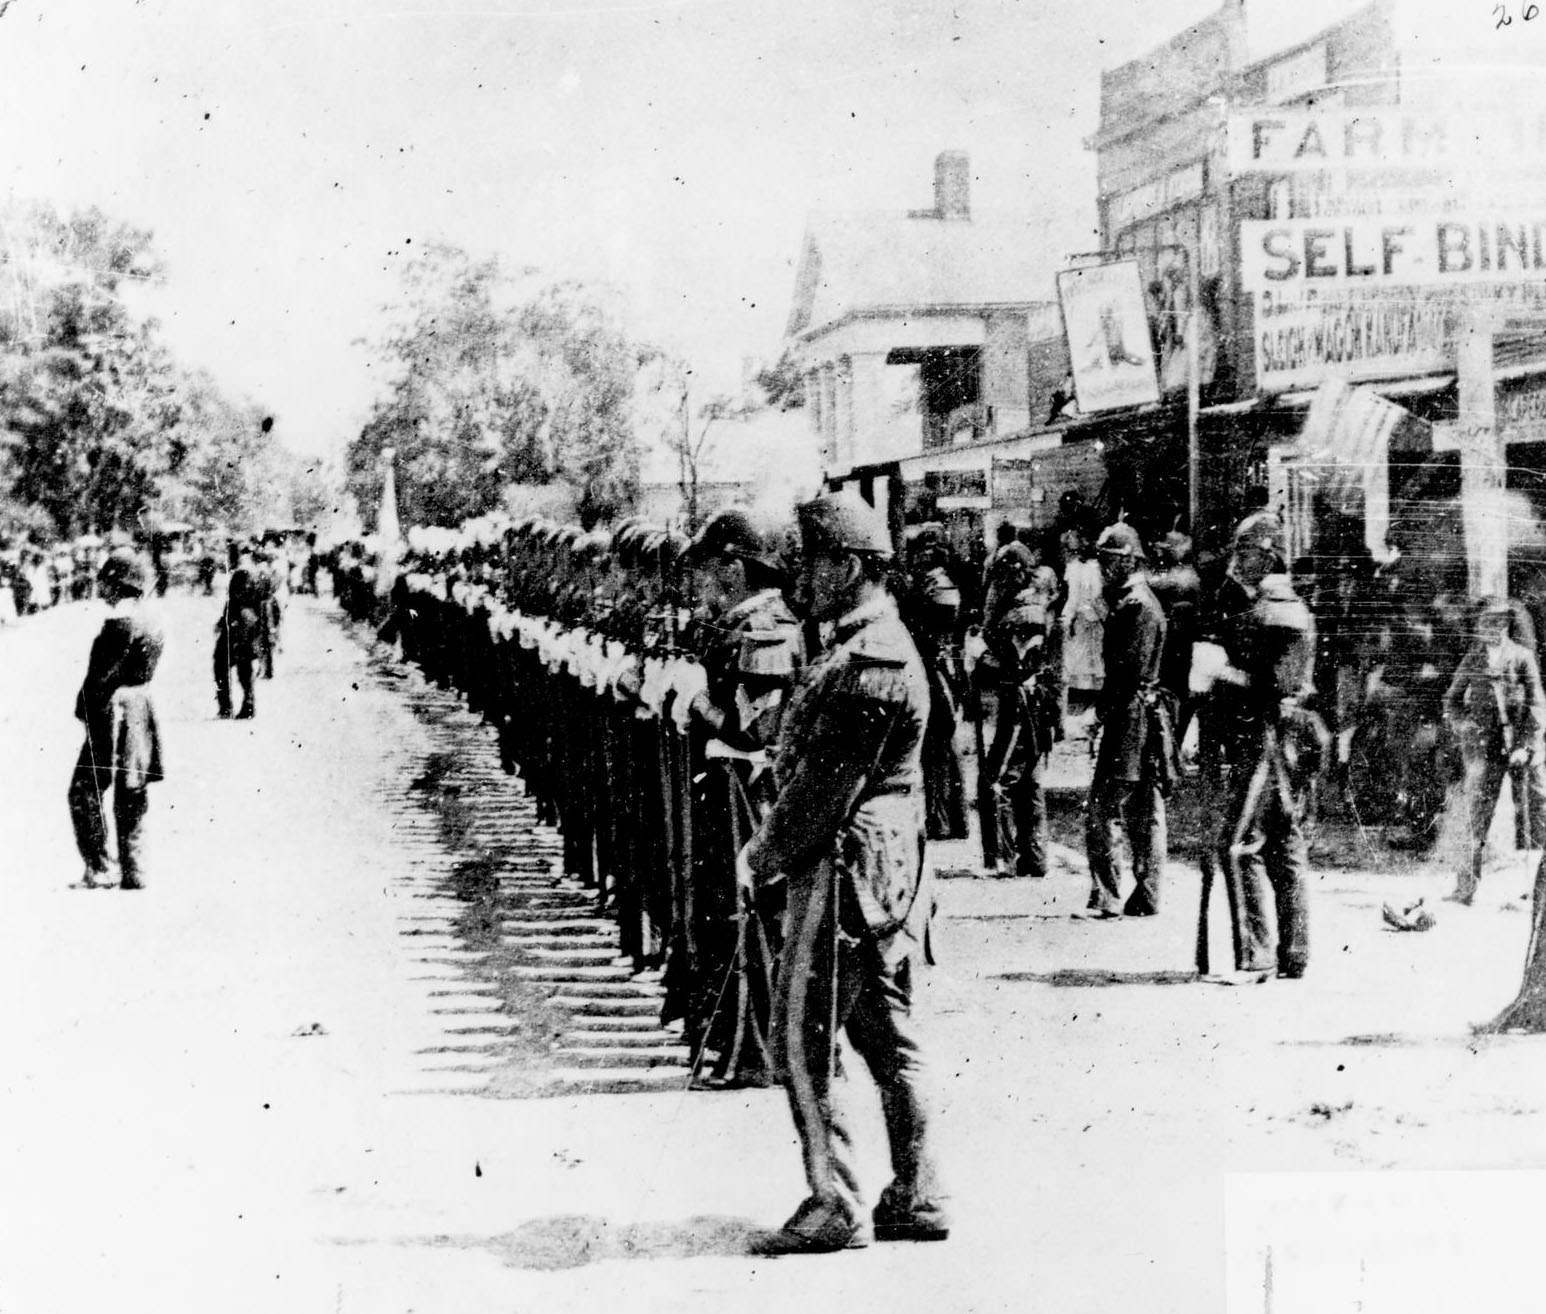 Civil War soldiers lined up in Janesville, 1860